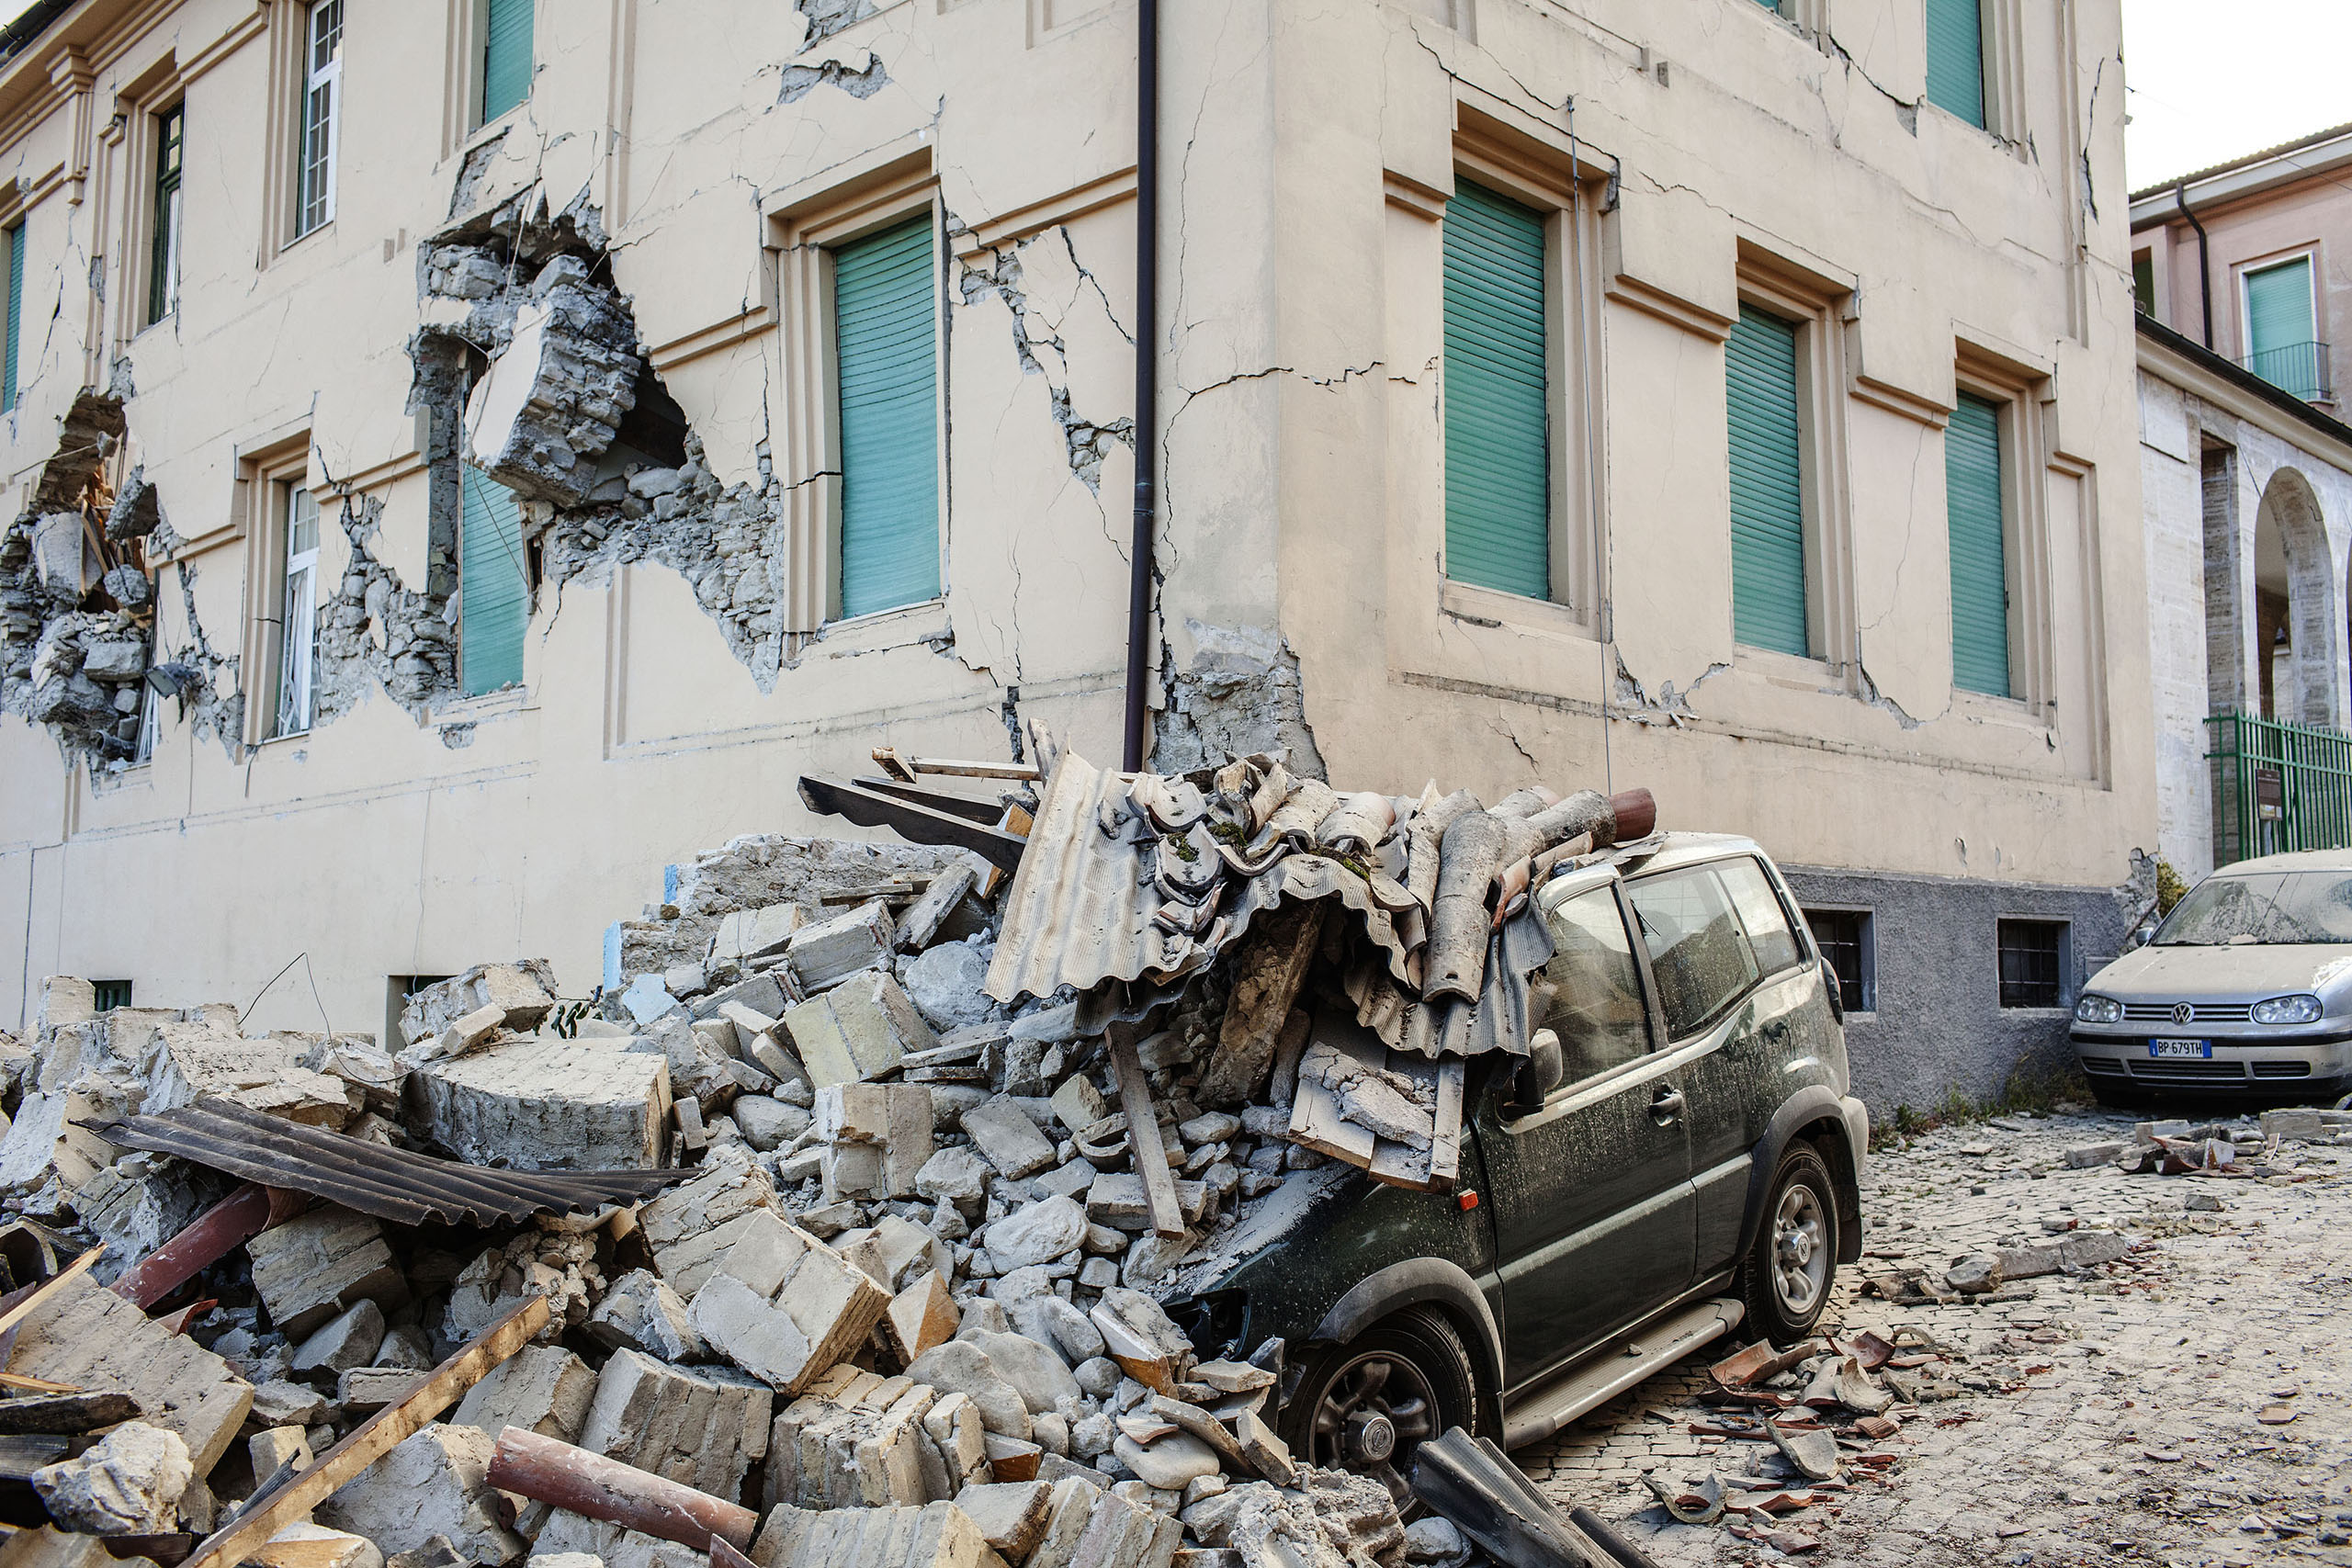 A car destroyed by the collapse of a house in Amatrice, Italy, on Aug. 24, 2016.